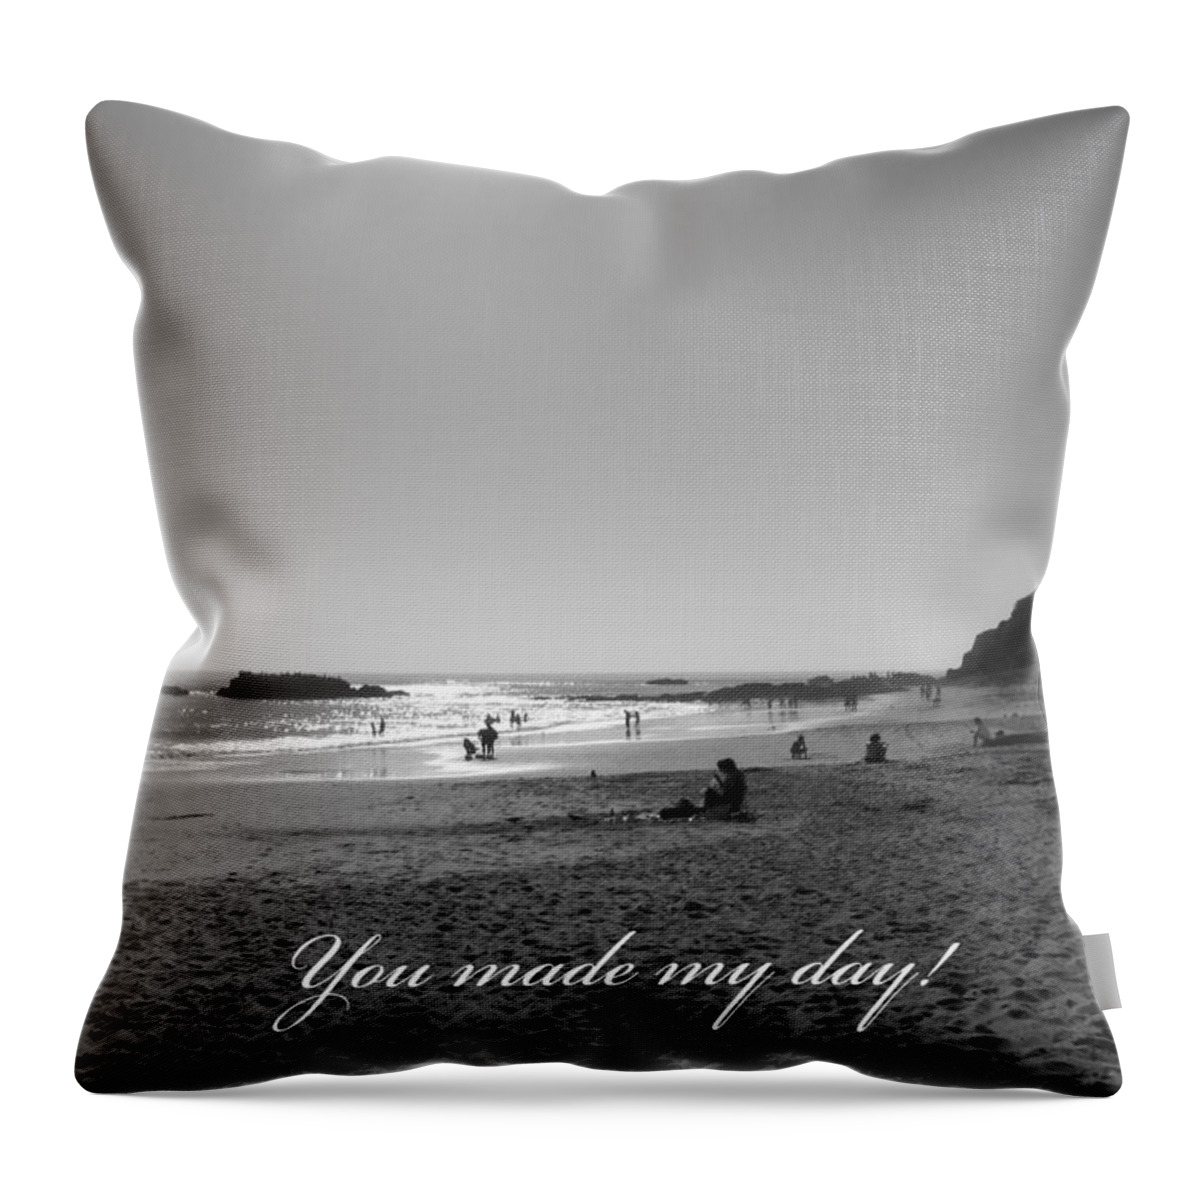 Greeting Card Throw Pillow featuring the photograph You Made My Day by Connie Fox